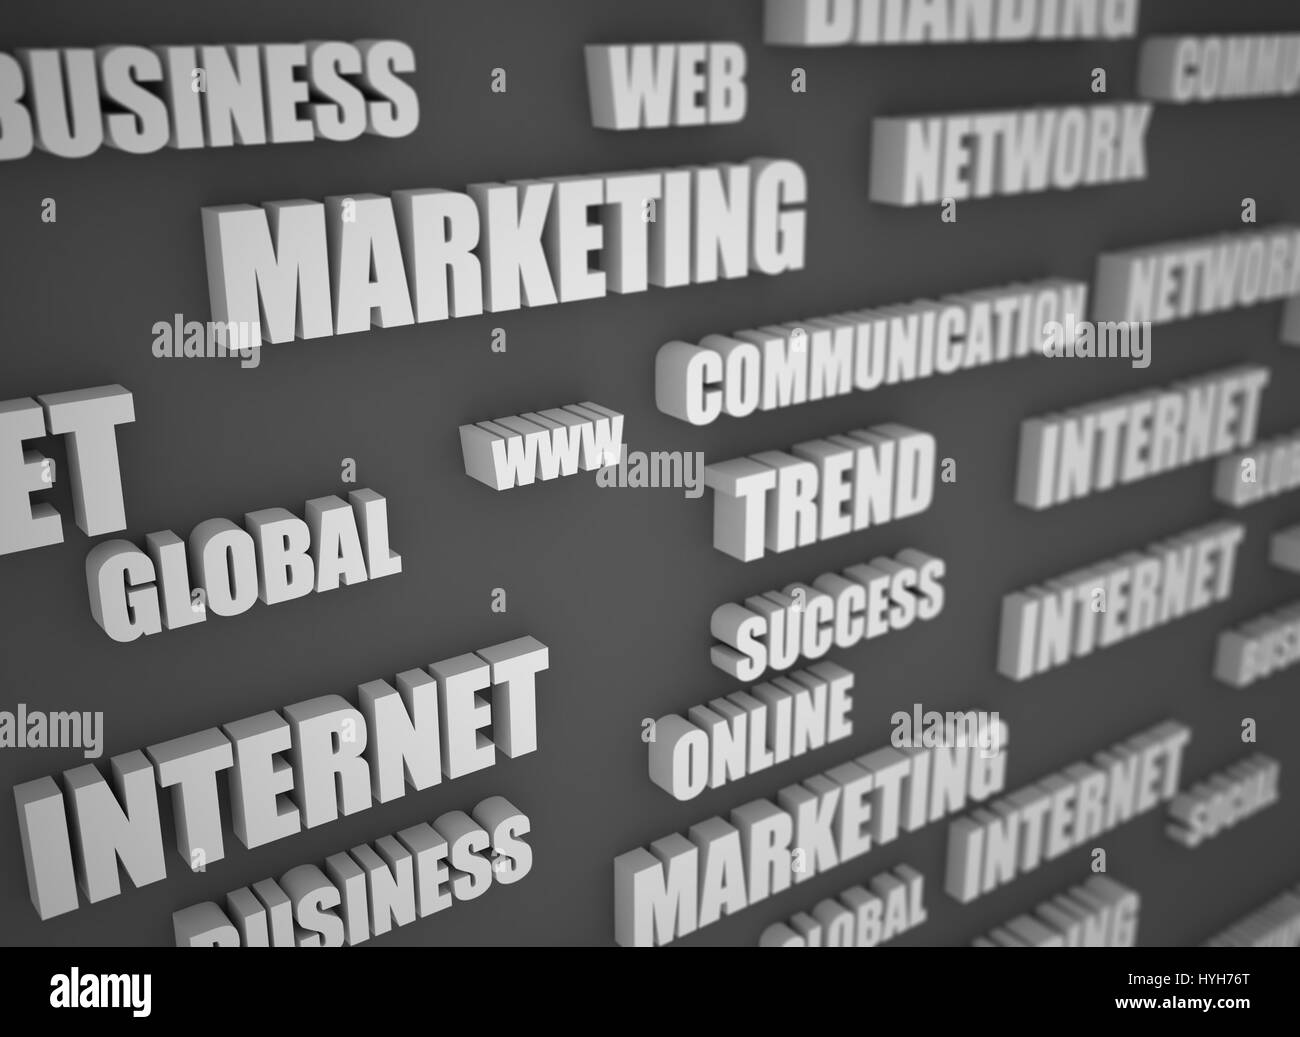 Web business related buzz words Stock Photo